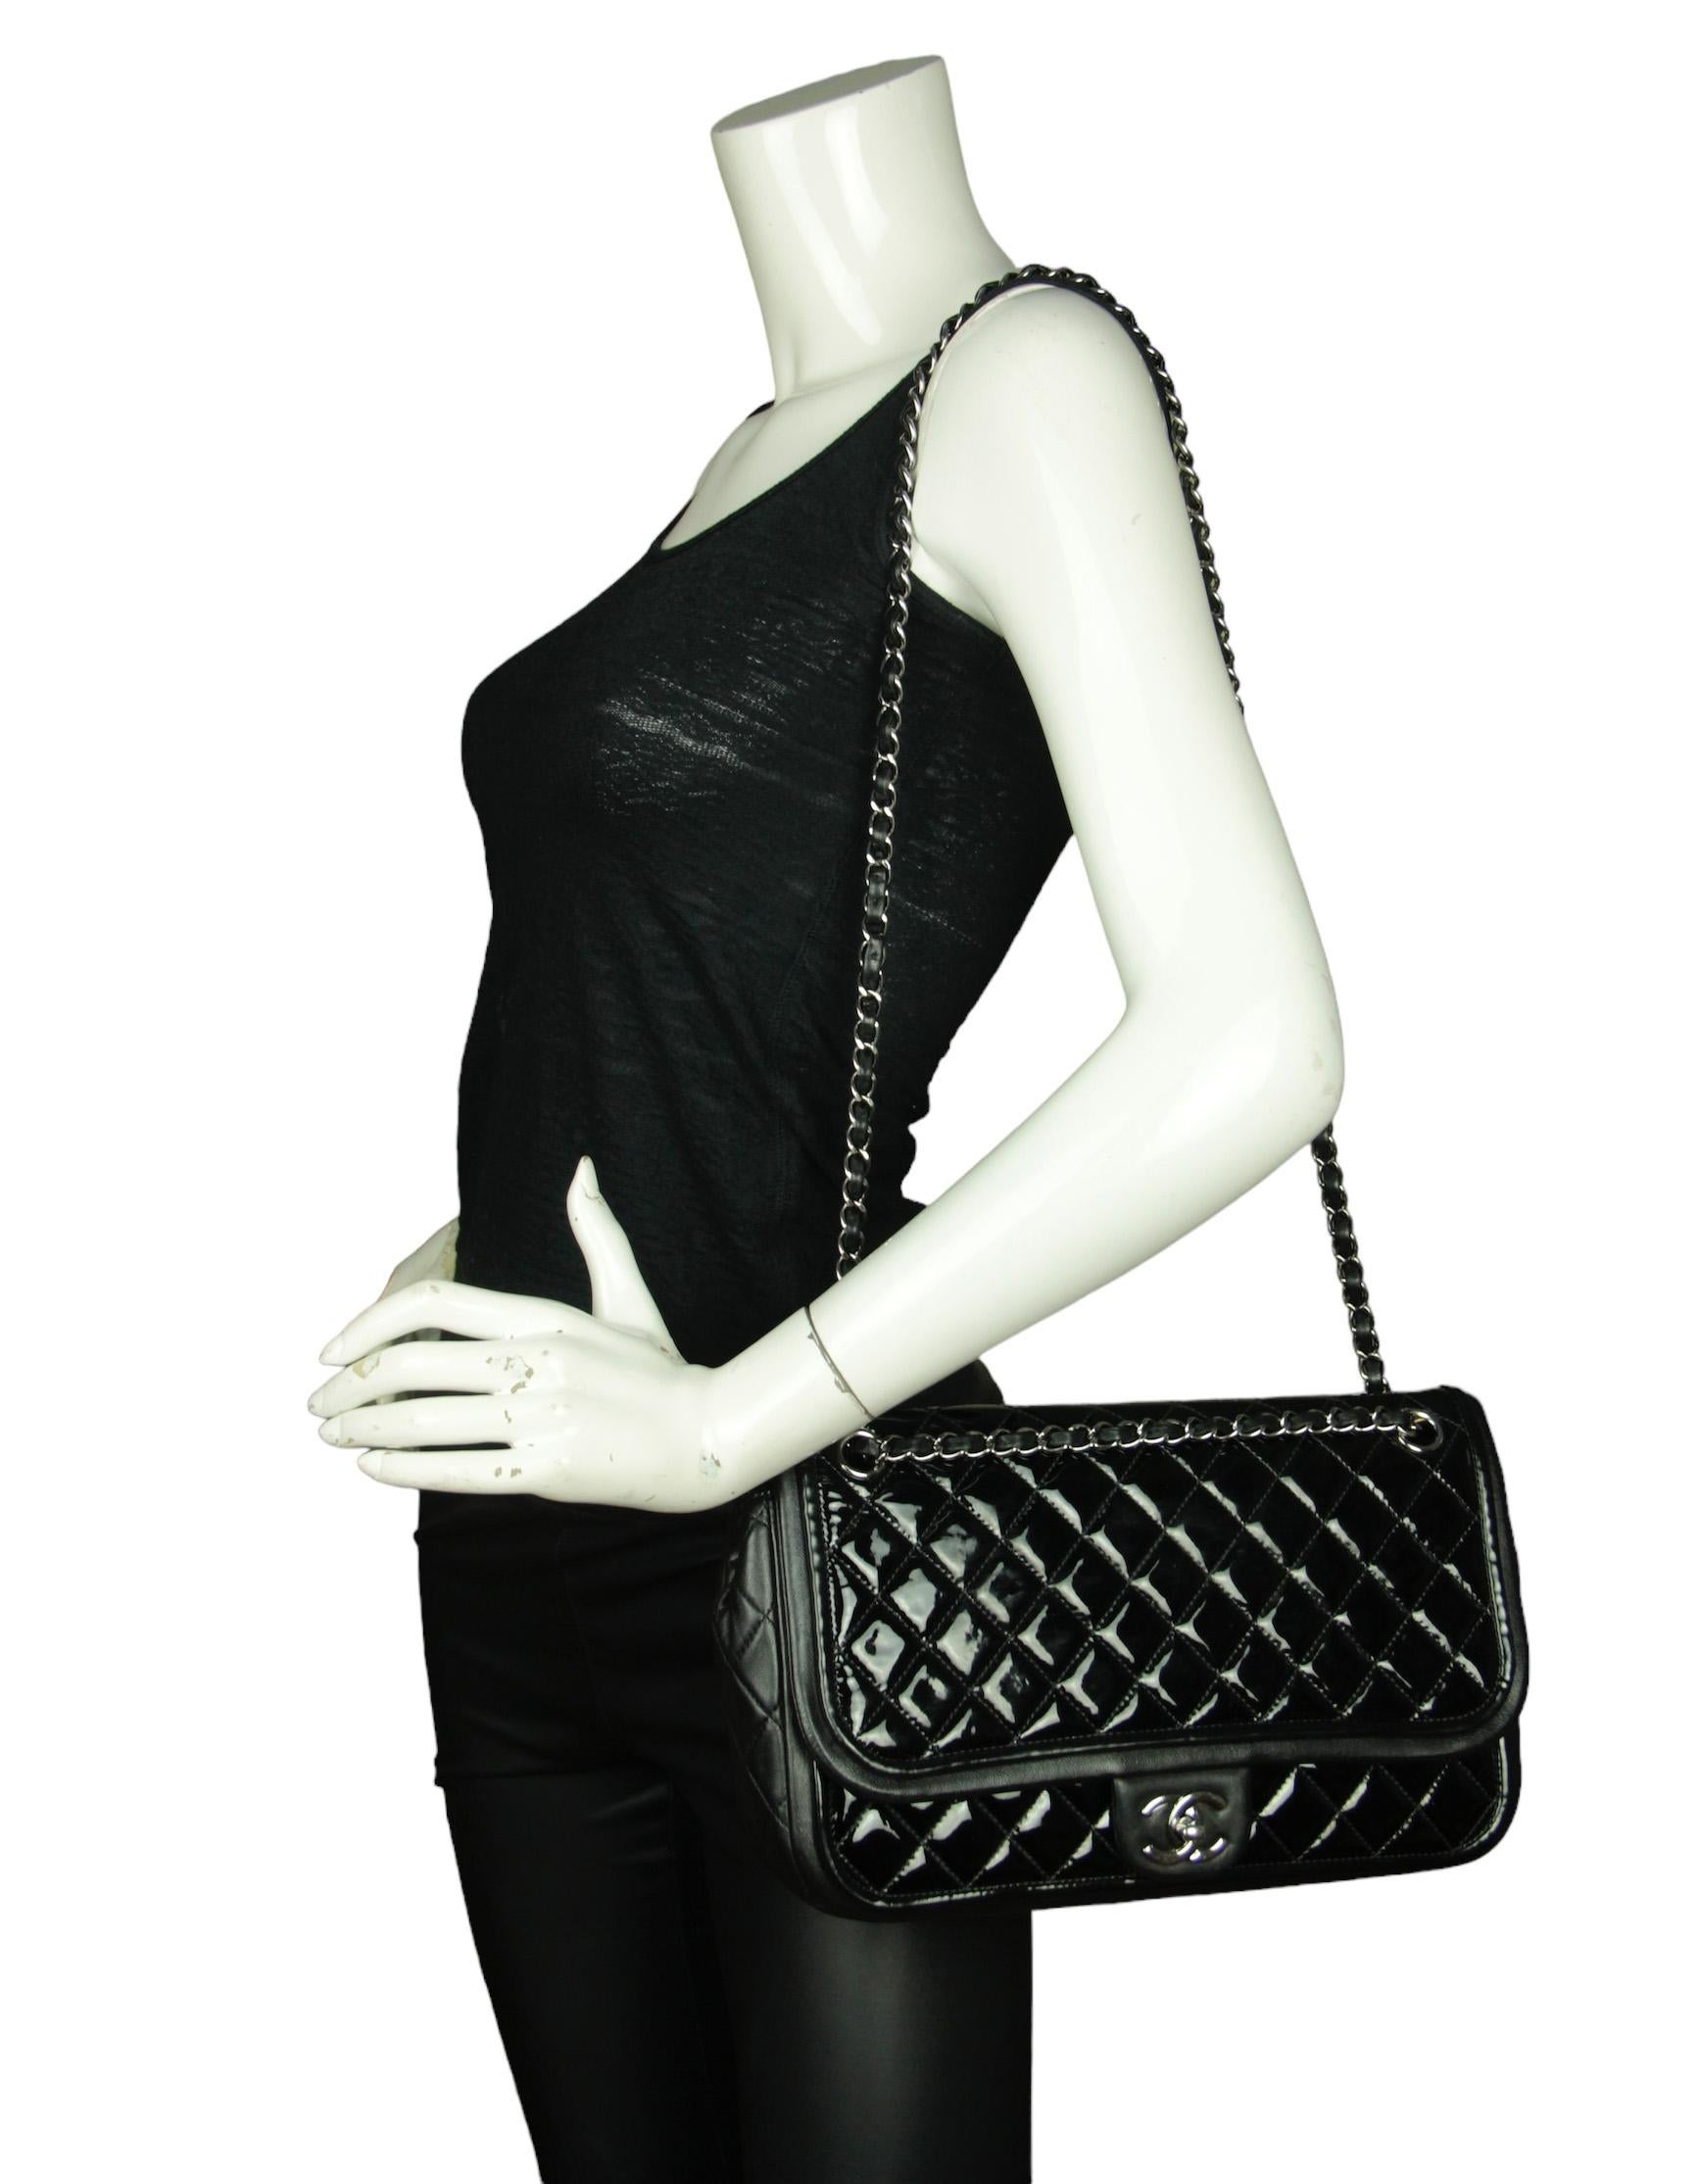 Chanel Black Classic Twist Patent Flap Bag w/ Lambskin Trim In Good Condition For Sale In New York, NY